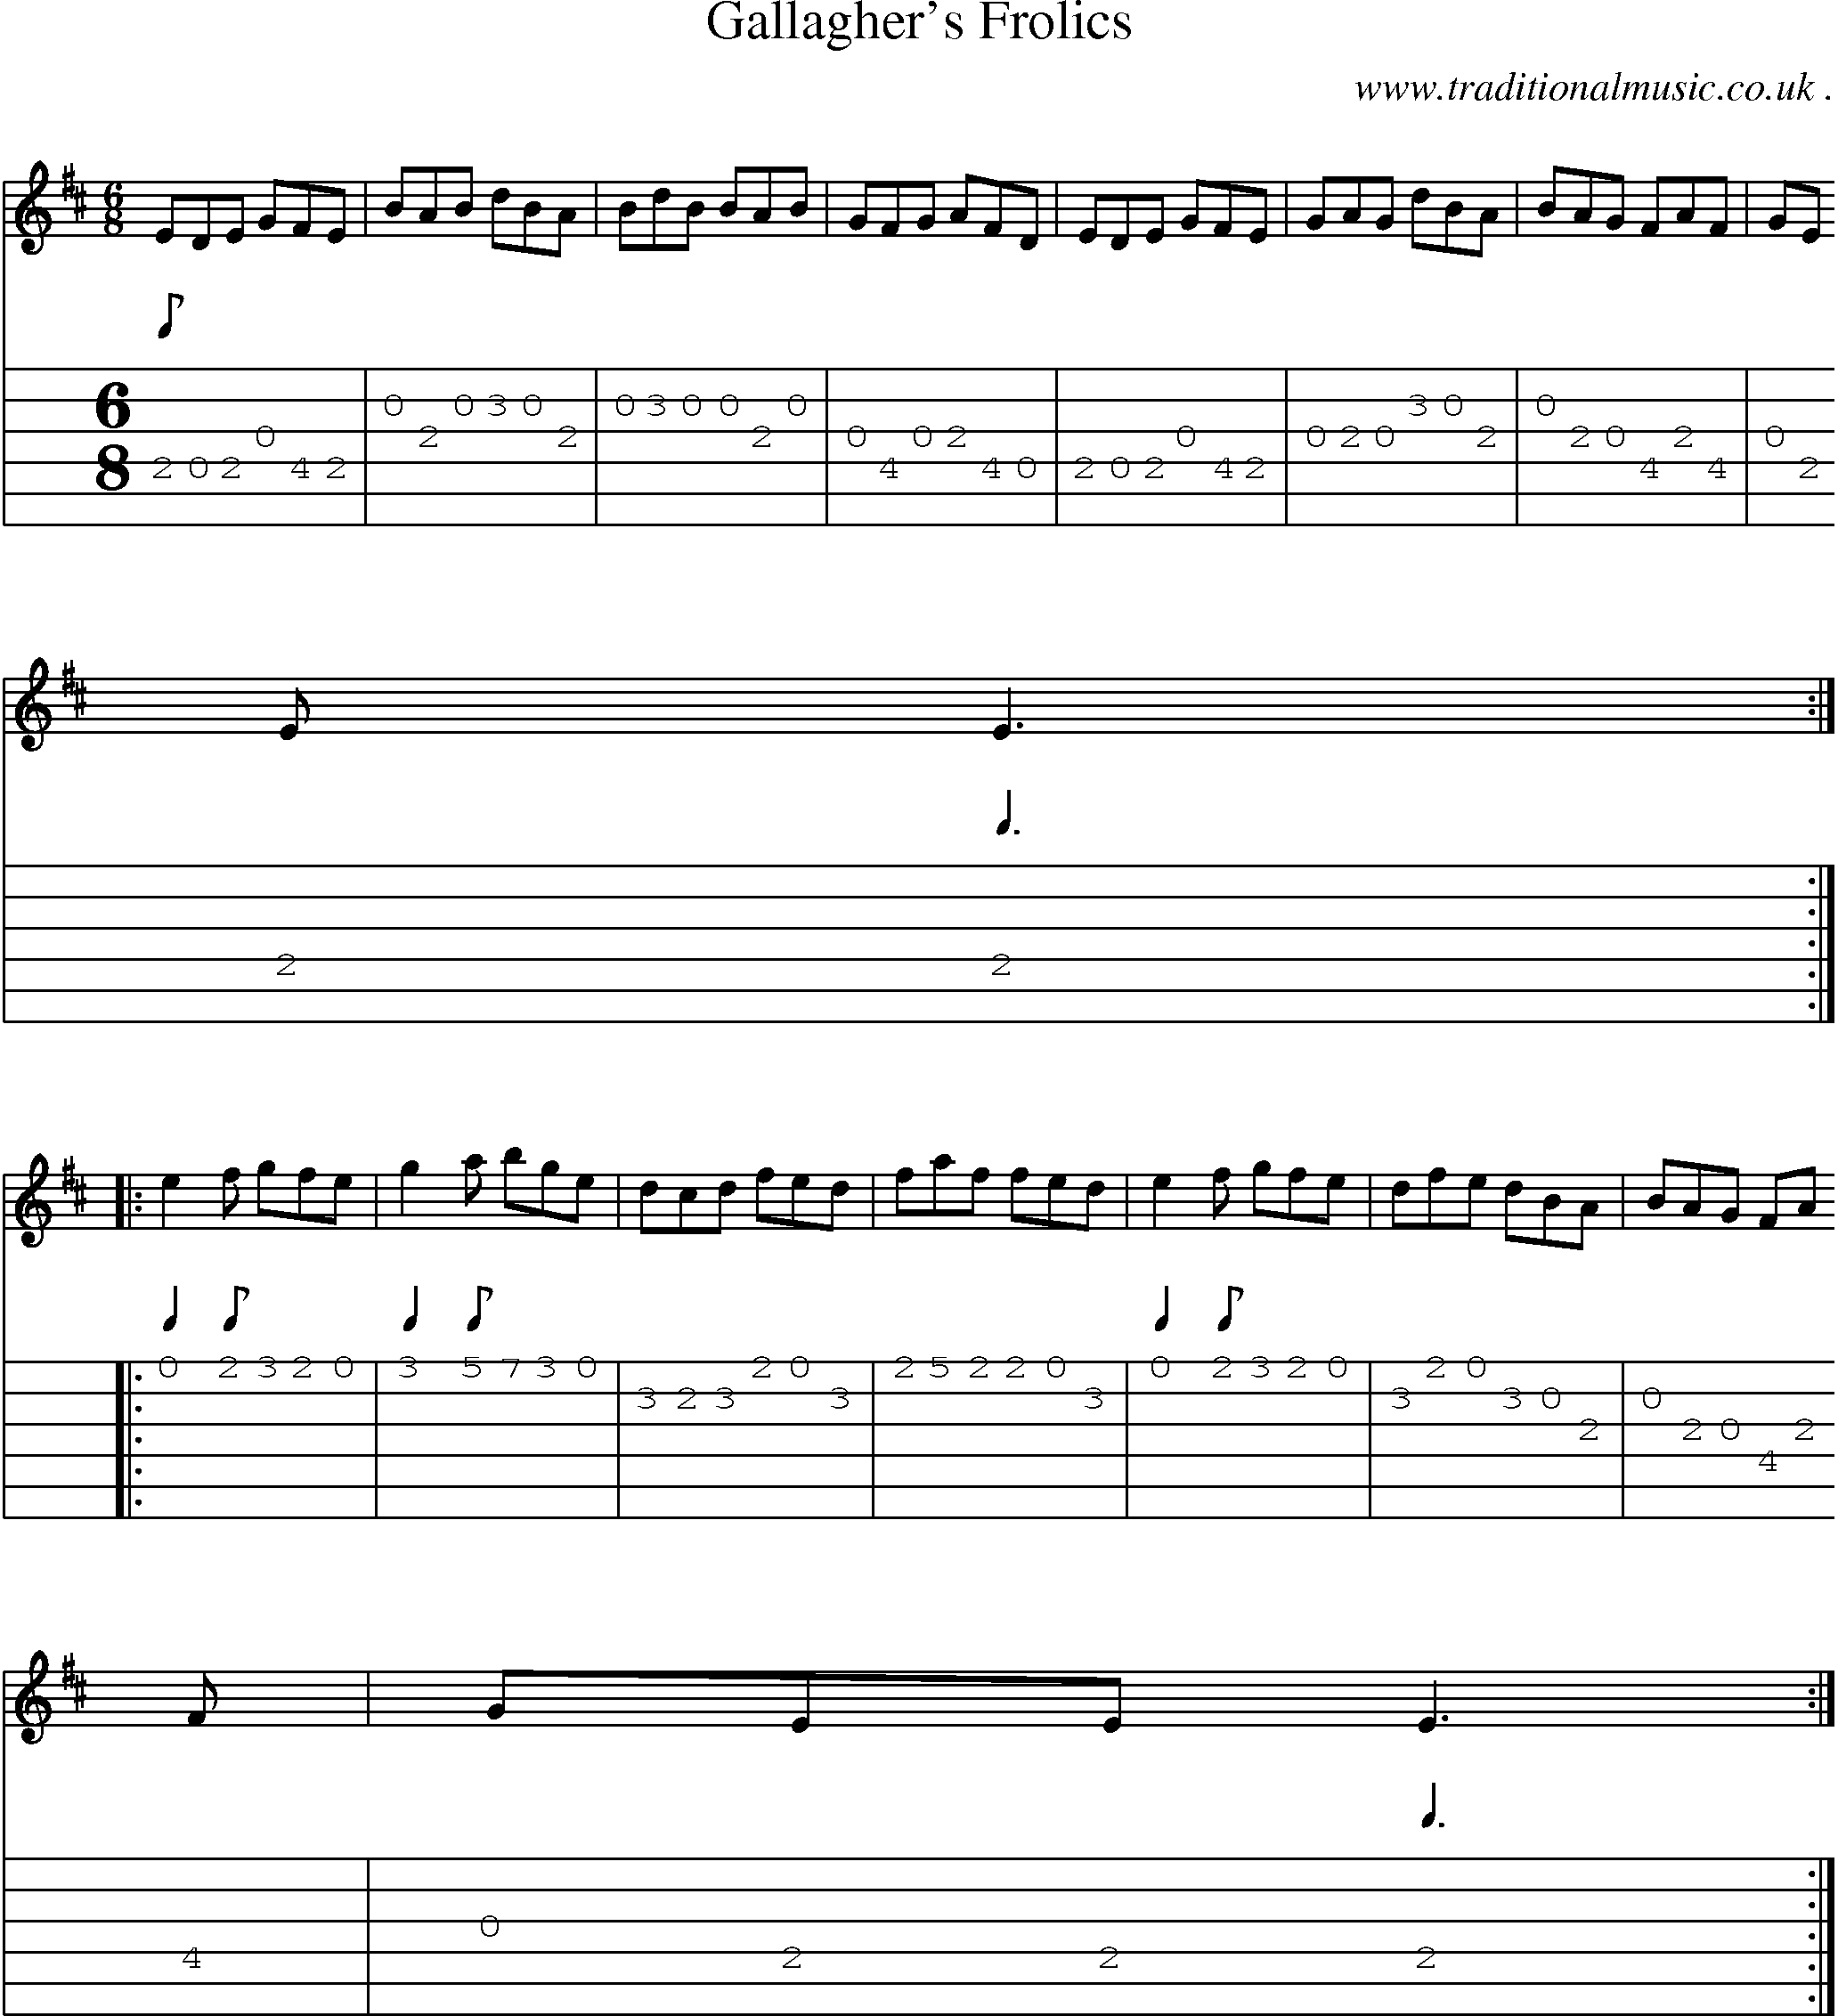 Sheet-Music and Guitar Tabs for Gallaghers Frolics